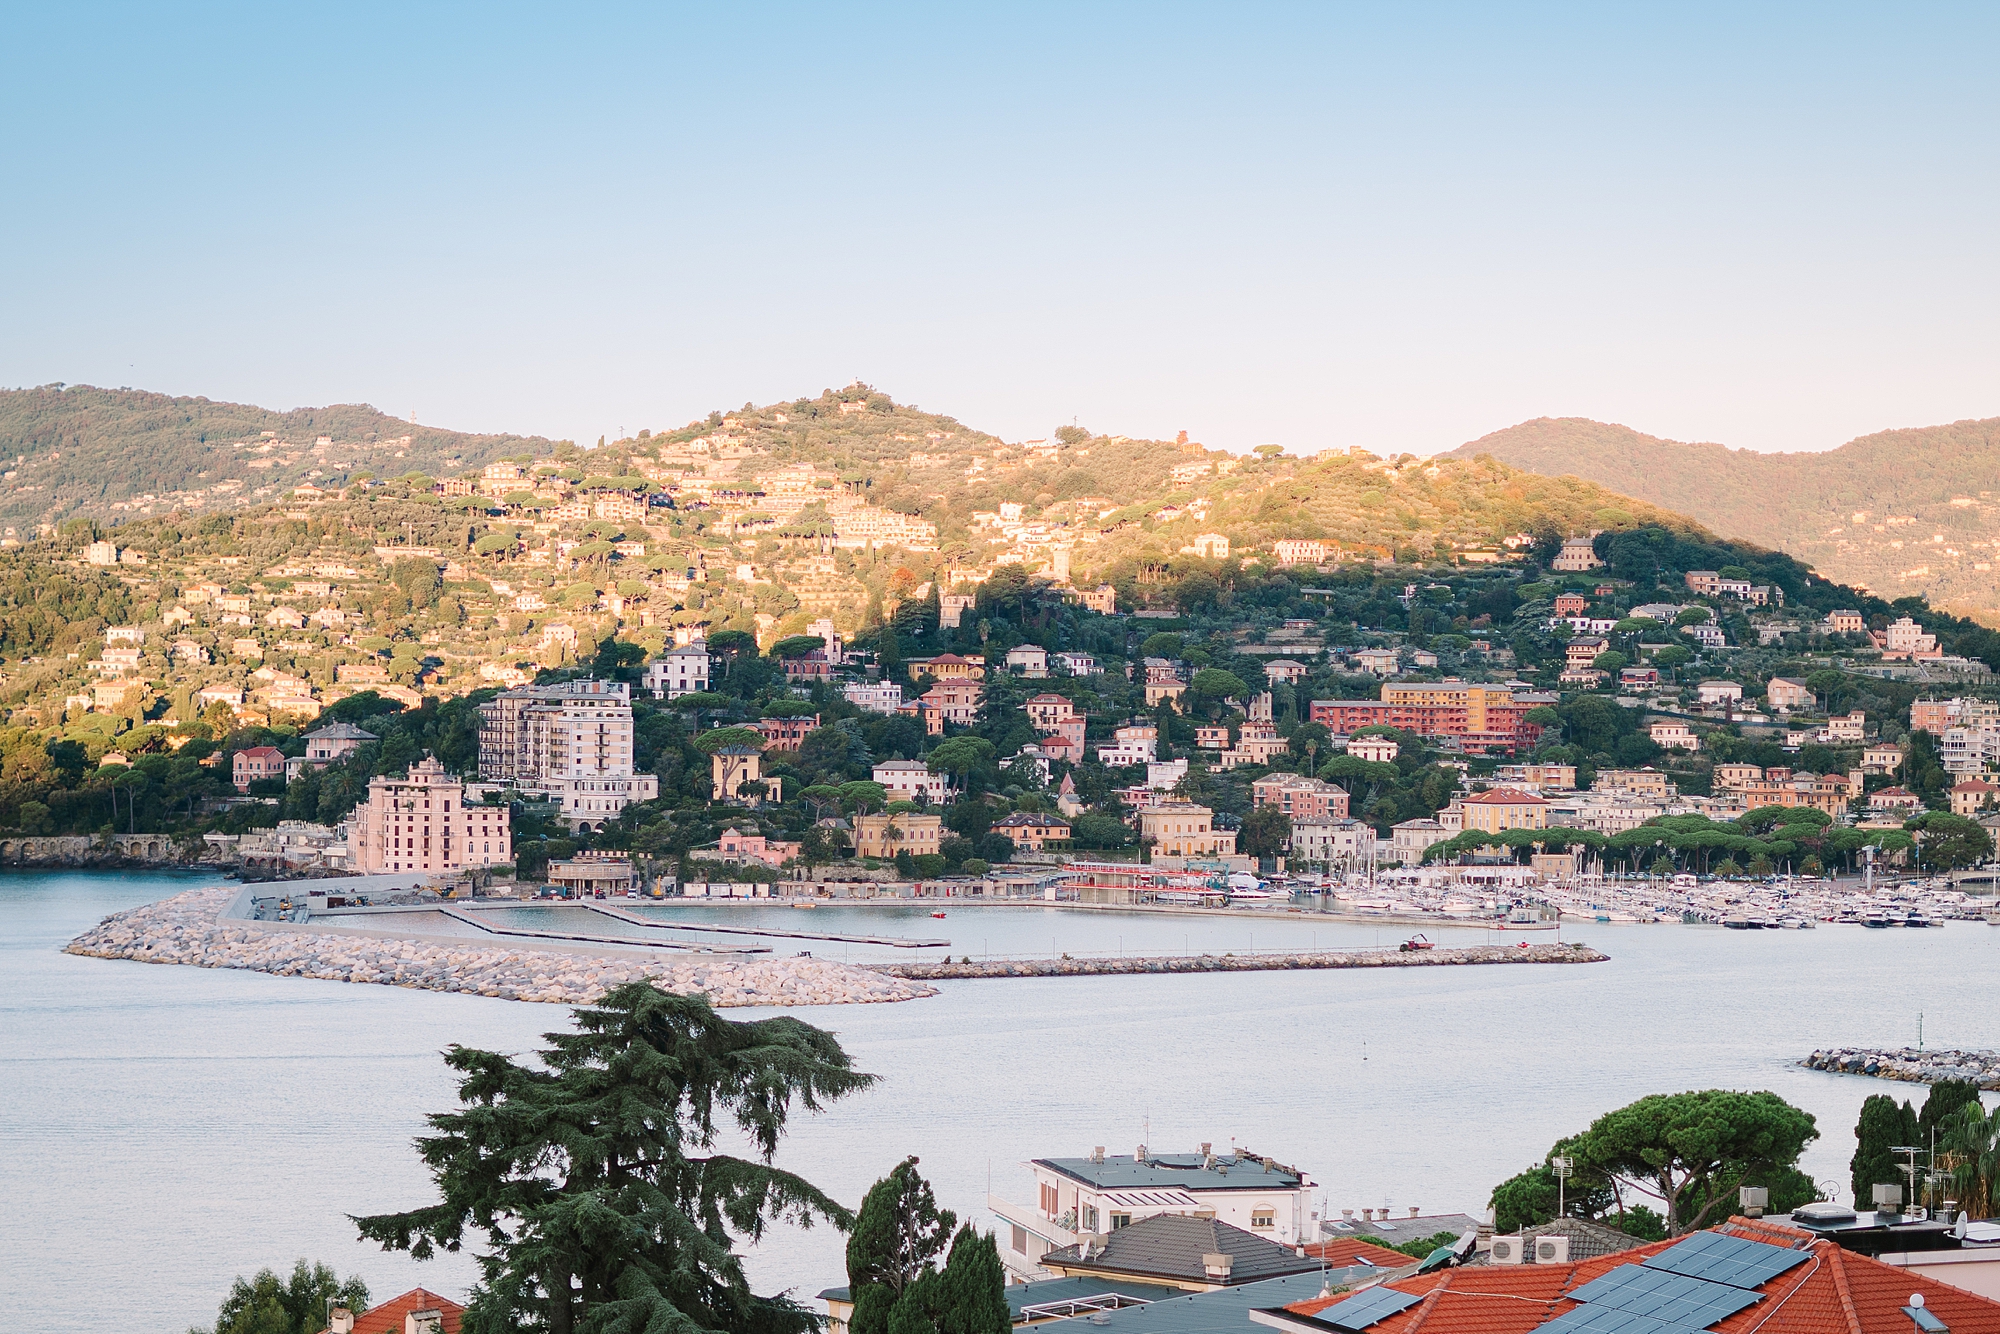 photographer Amy Allmand shares her trip to Italy in 2023 including her favorite stops including the Italian Riviera